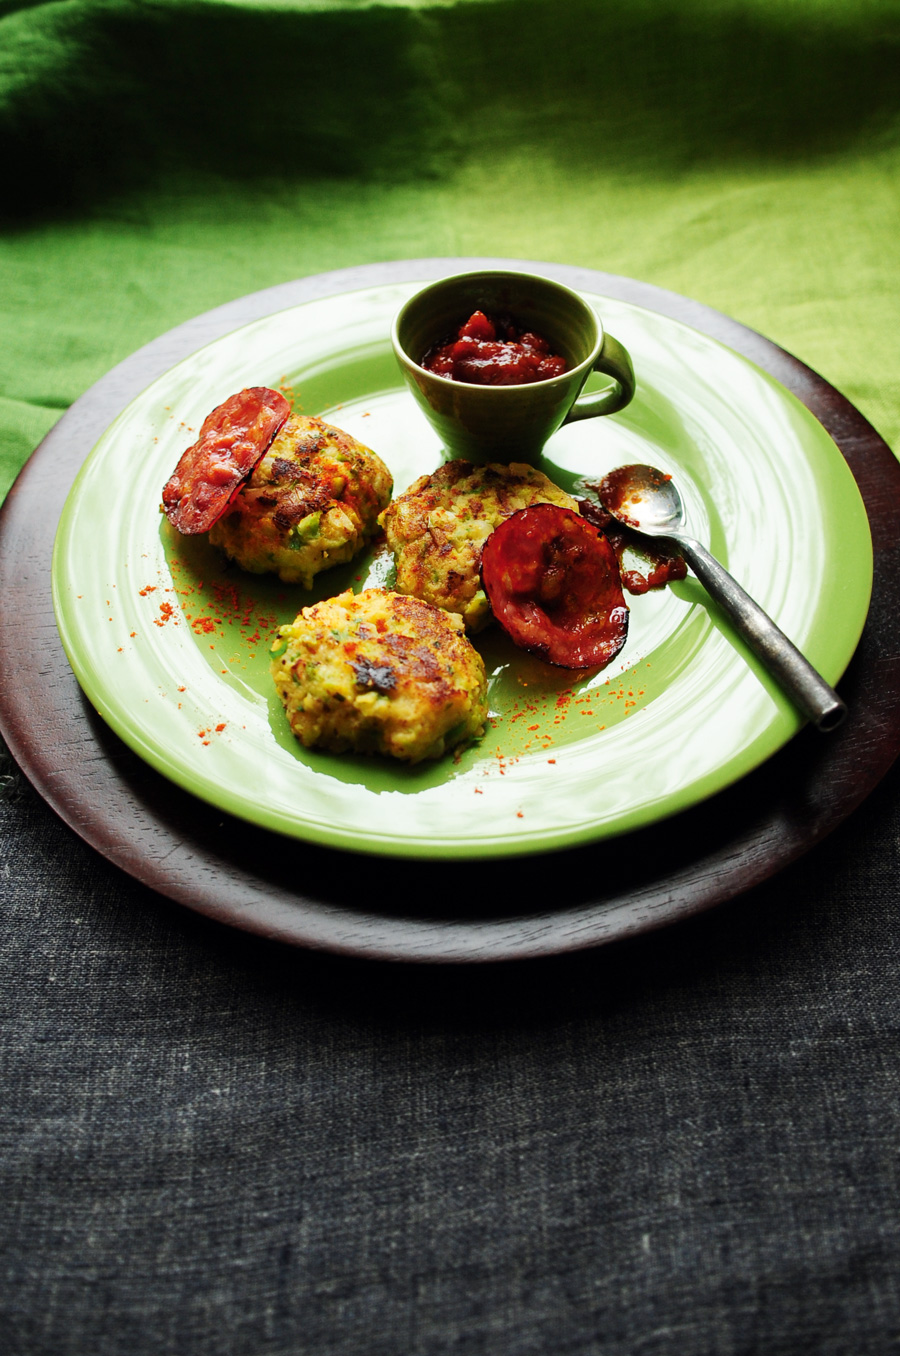 Brussels sprouts, potato and swede cakes